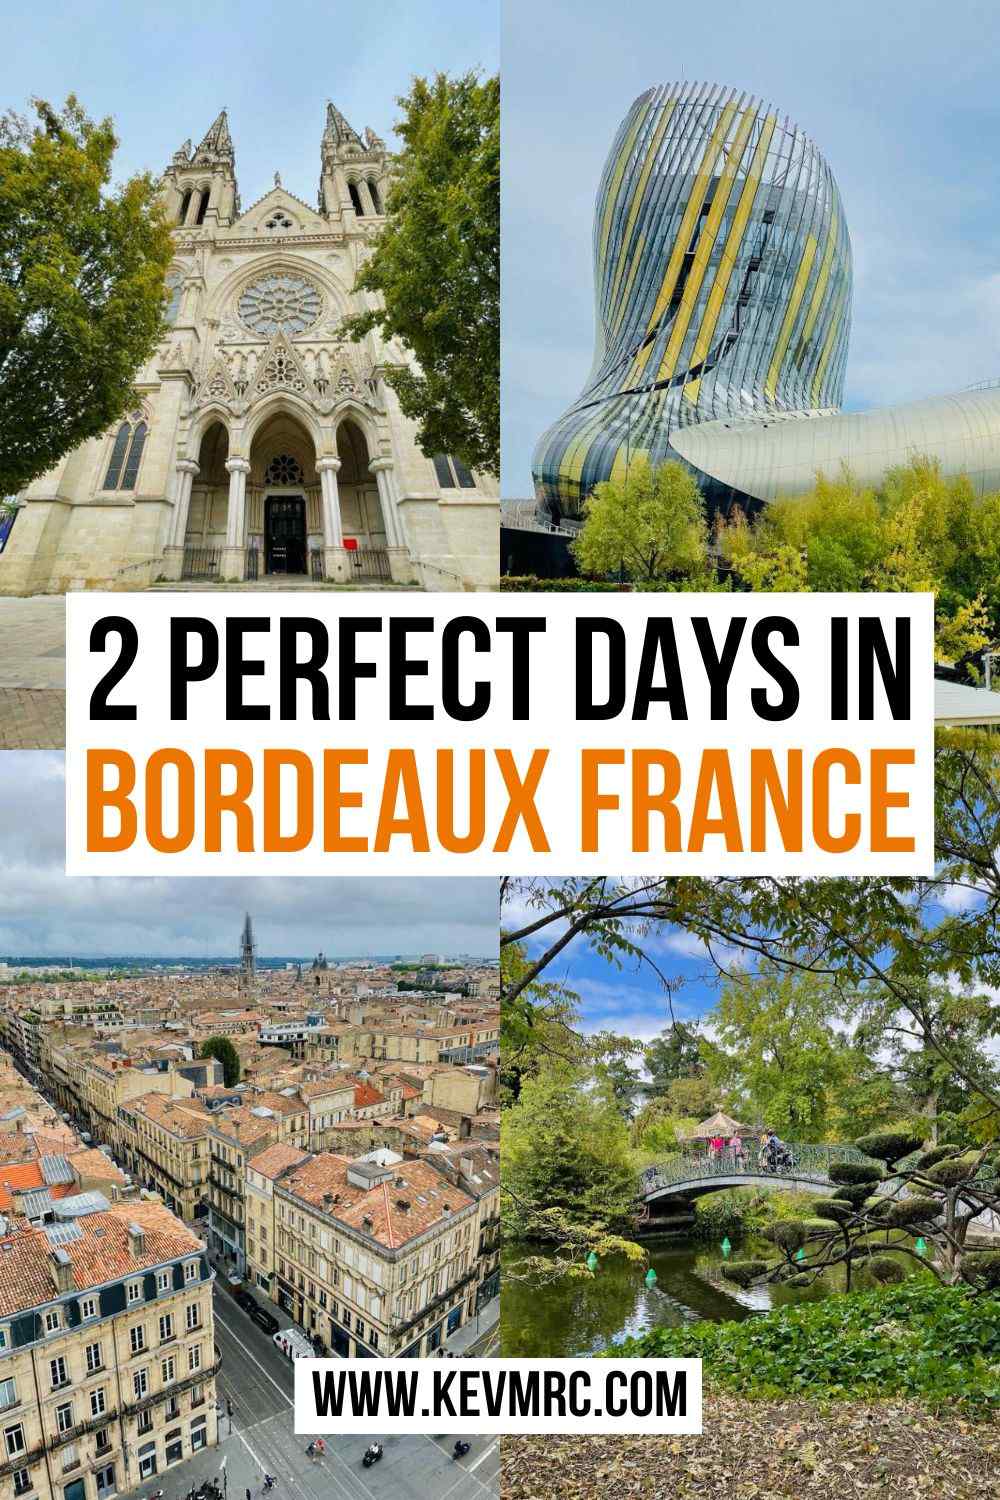 Wondering what to do in Bordeaux in 2 days? Find out here the best itinerary to spend 2 days in Bordeaux, with a free map and helpful tips. bordeaux france travel guide | bordeaux france itinerary | bordeaux itinerary | bordeaux travel tips | bordeaux city guide #bordeaux